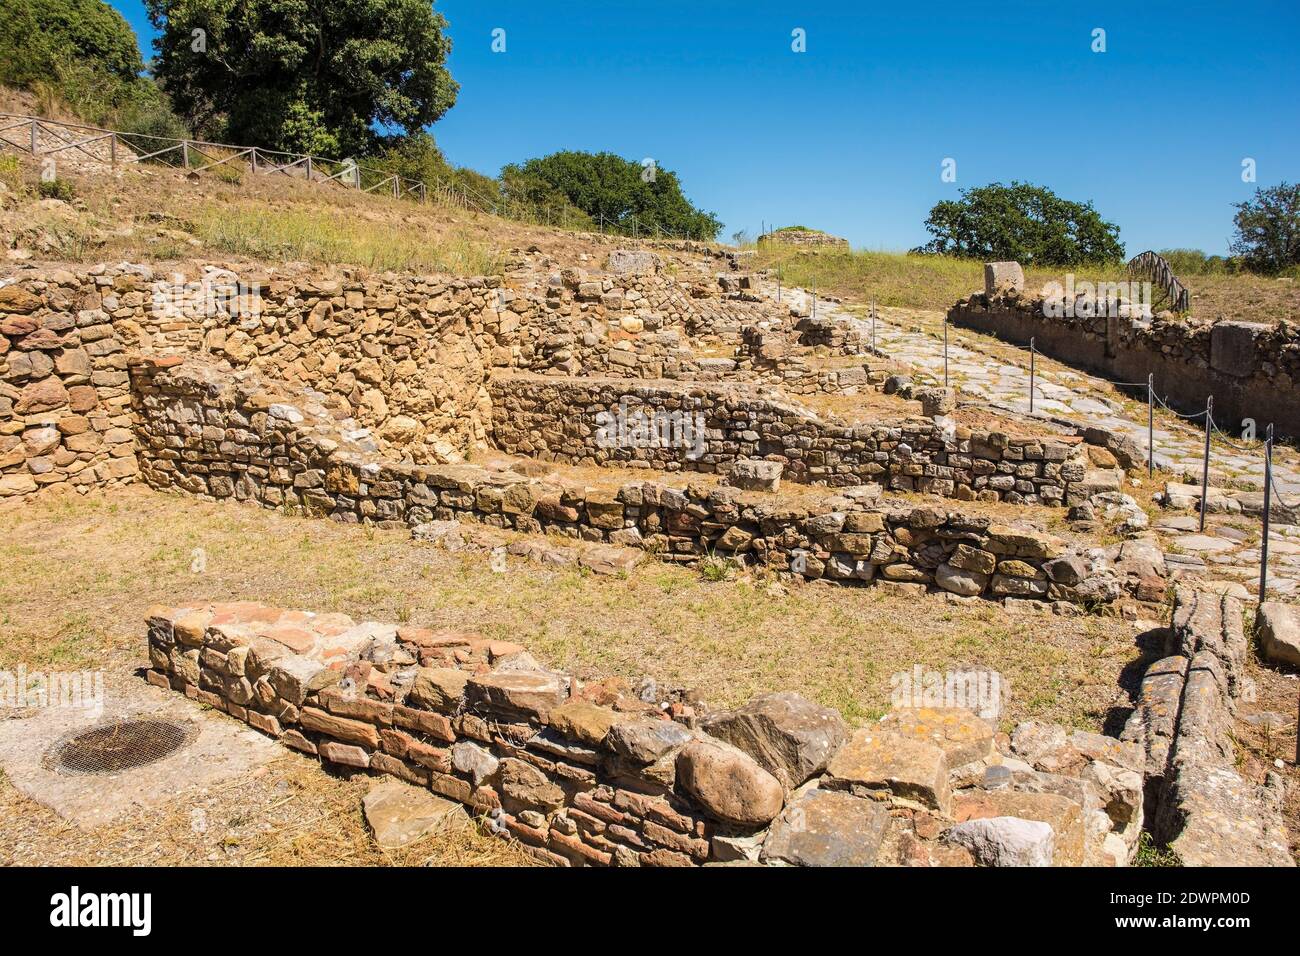 Grosseto, Italy - September 4th 2020. The ruins of Roman era workshops in Roselle or Rusellae, an ancient Etruscan and Roman city in Tuscany Stock Photo